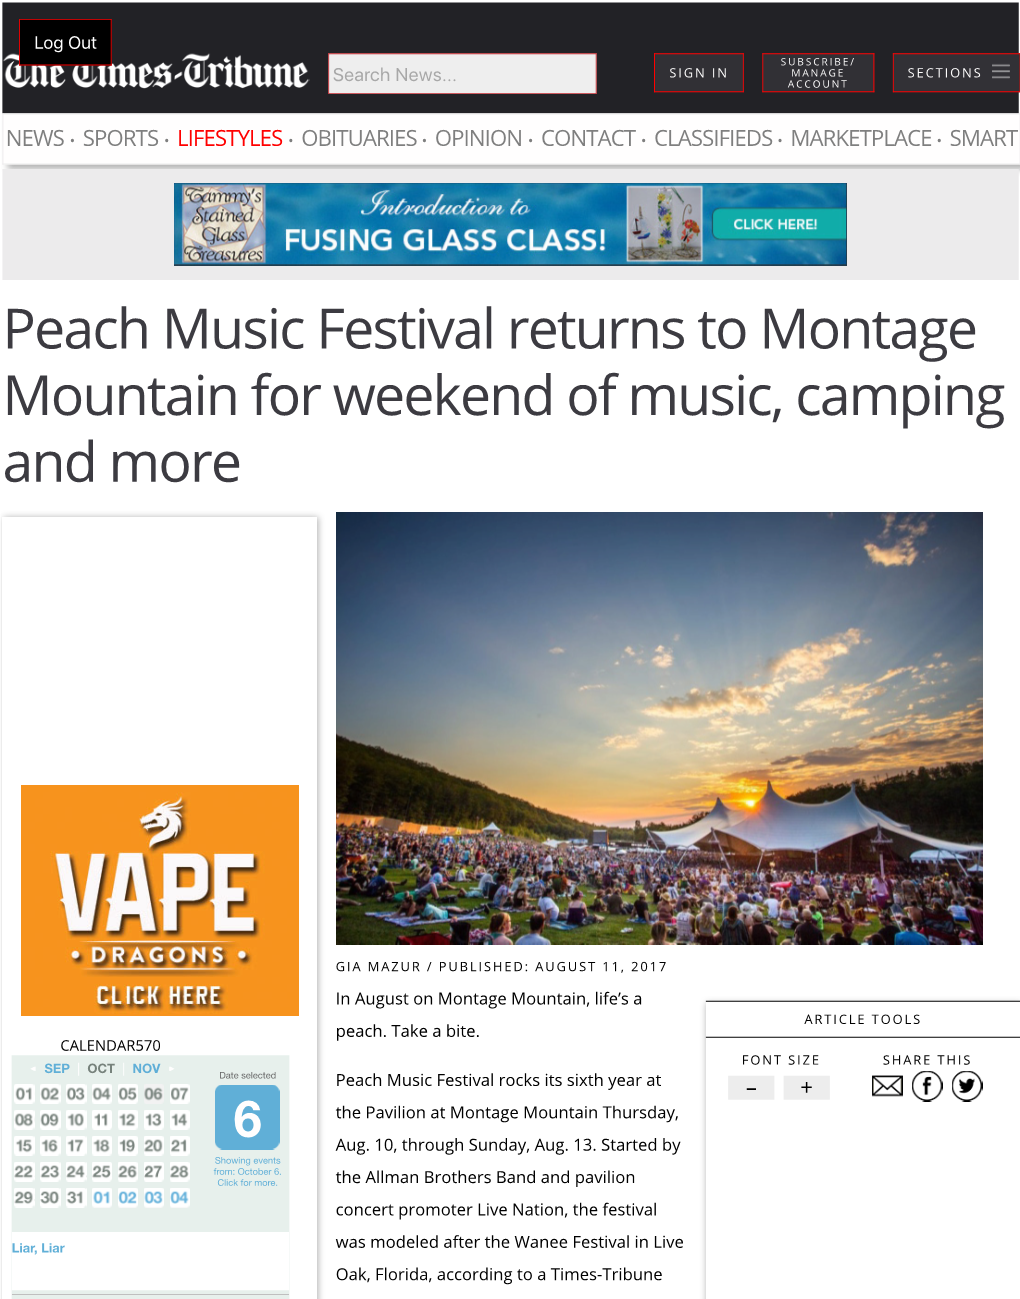 Peach Music Festival Returns to Montage Mountain for Weekend of Music, Camping and More